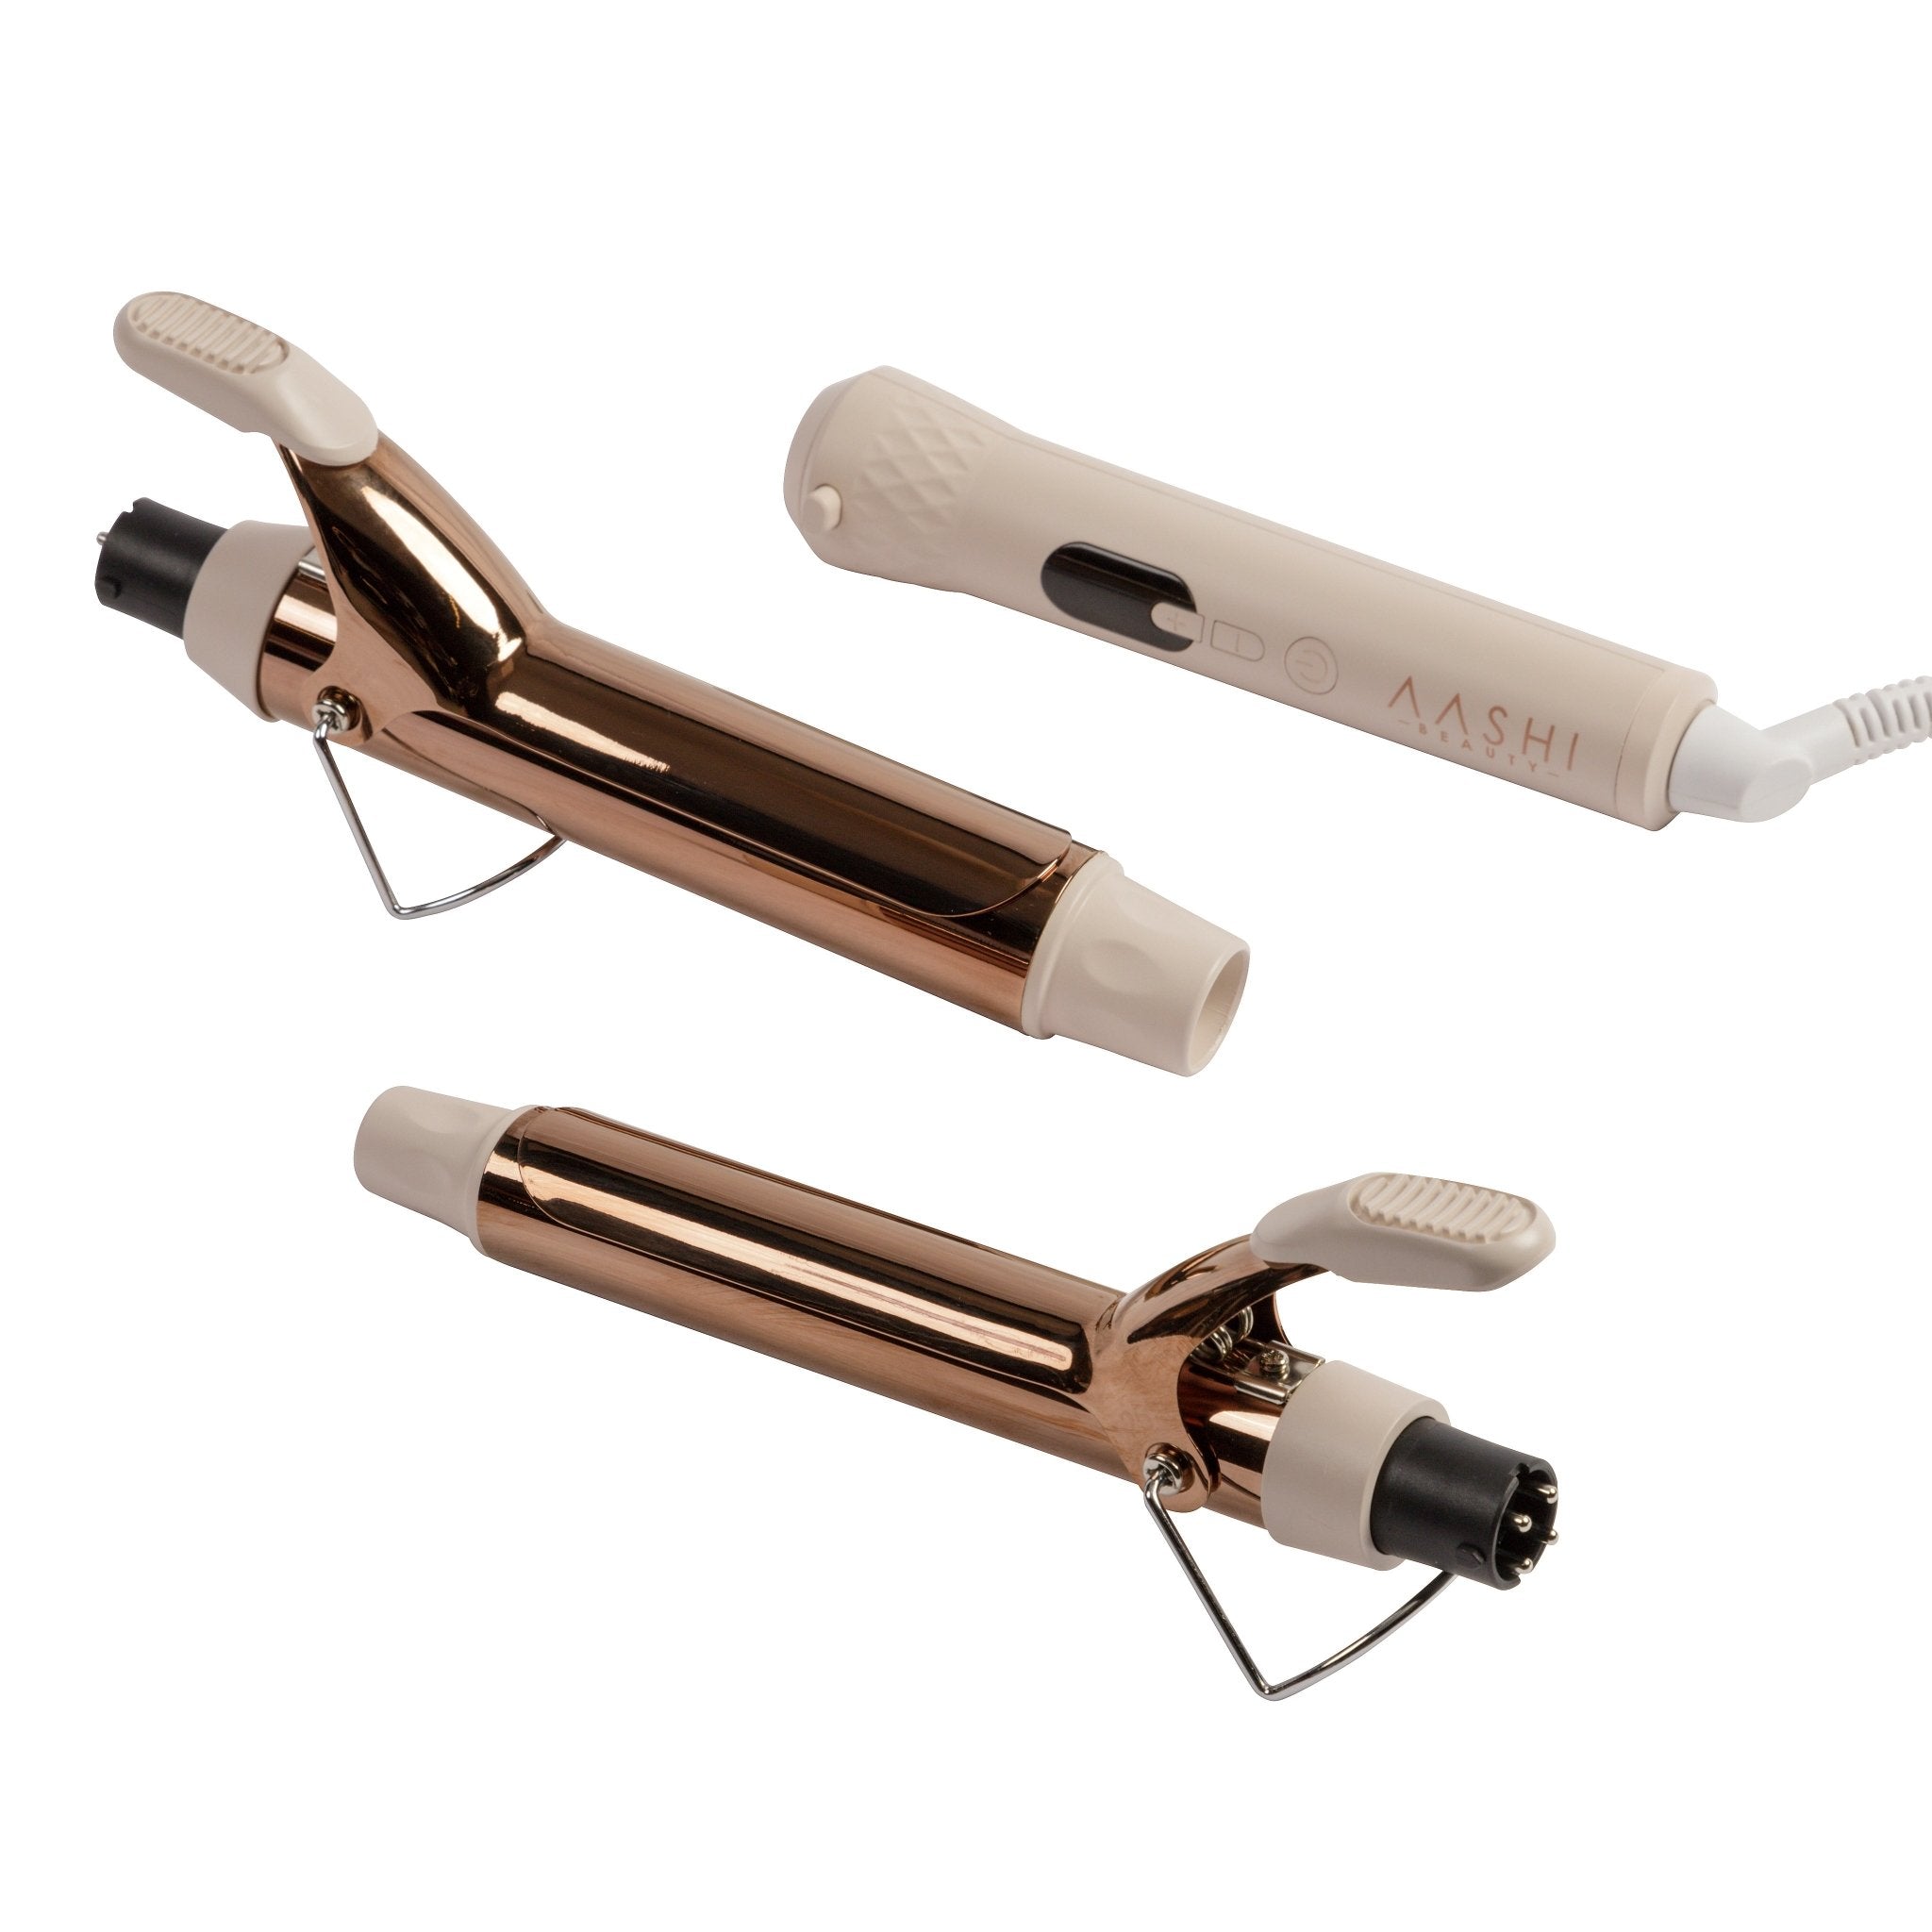 2 in 1 Titanium Curler, 32mm & 25mm (1.25" & 1") Clamp Curler - Aashi Beauty